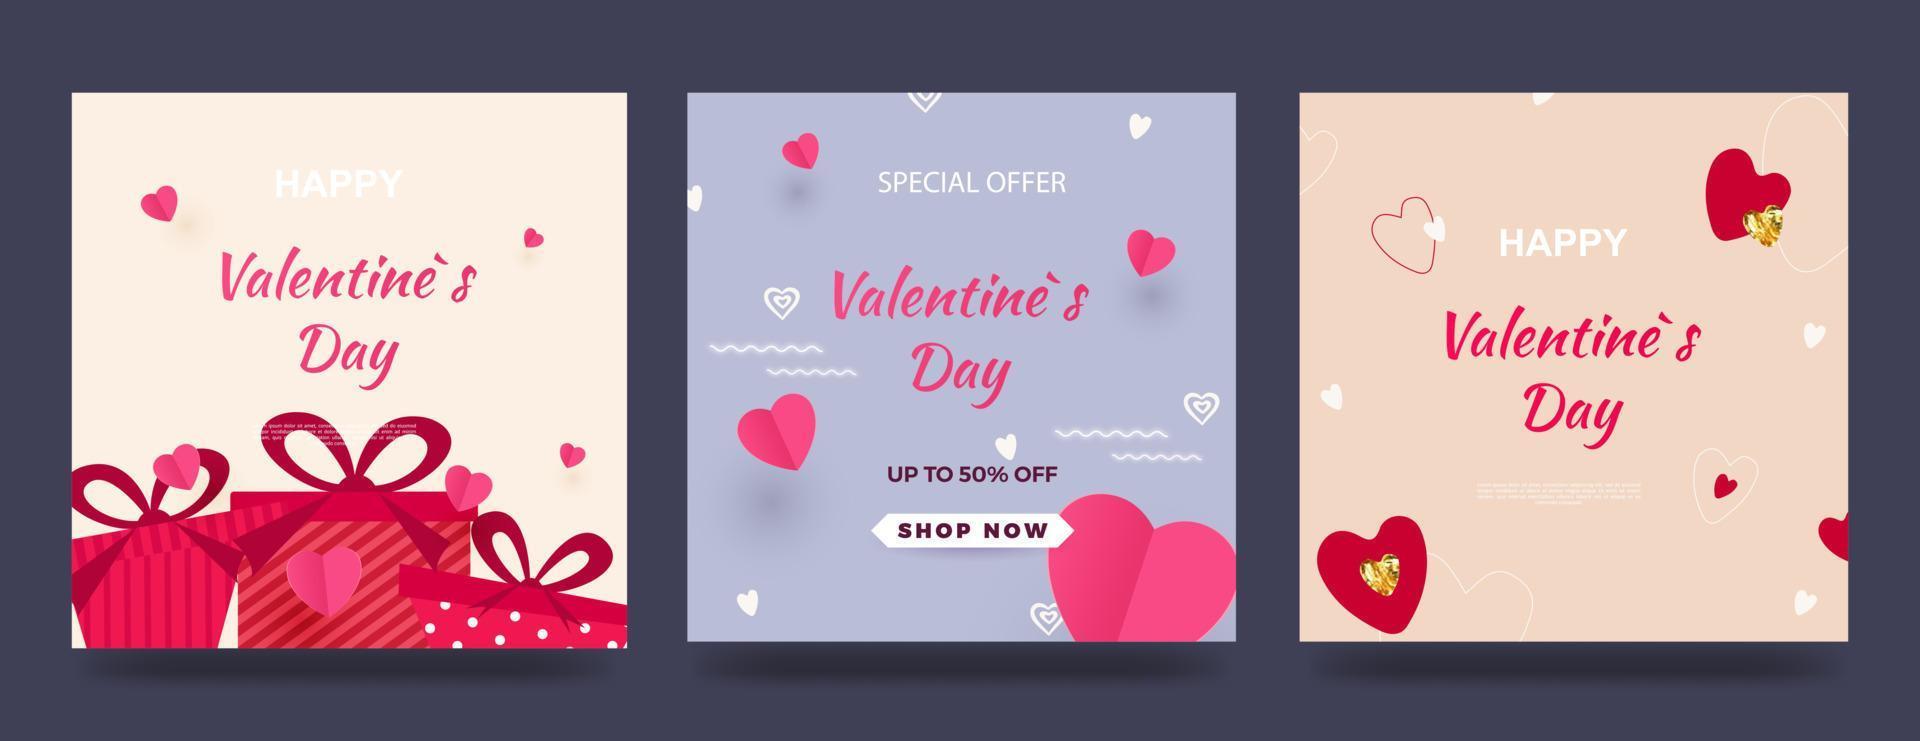 Happy Valentine s day sale poster. Set of cards with hearts and gifts. Vector illustration for website, banners, ads, coupons, promotional materials. Vector illustration